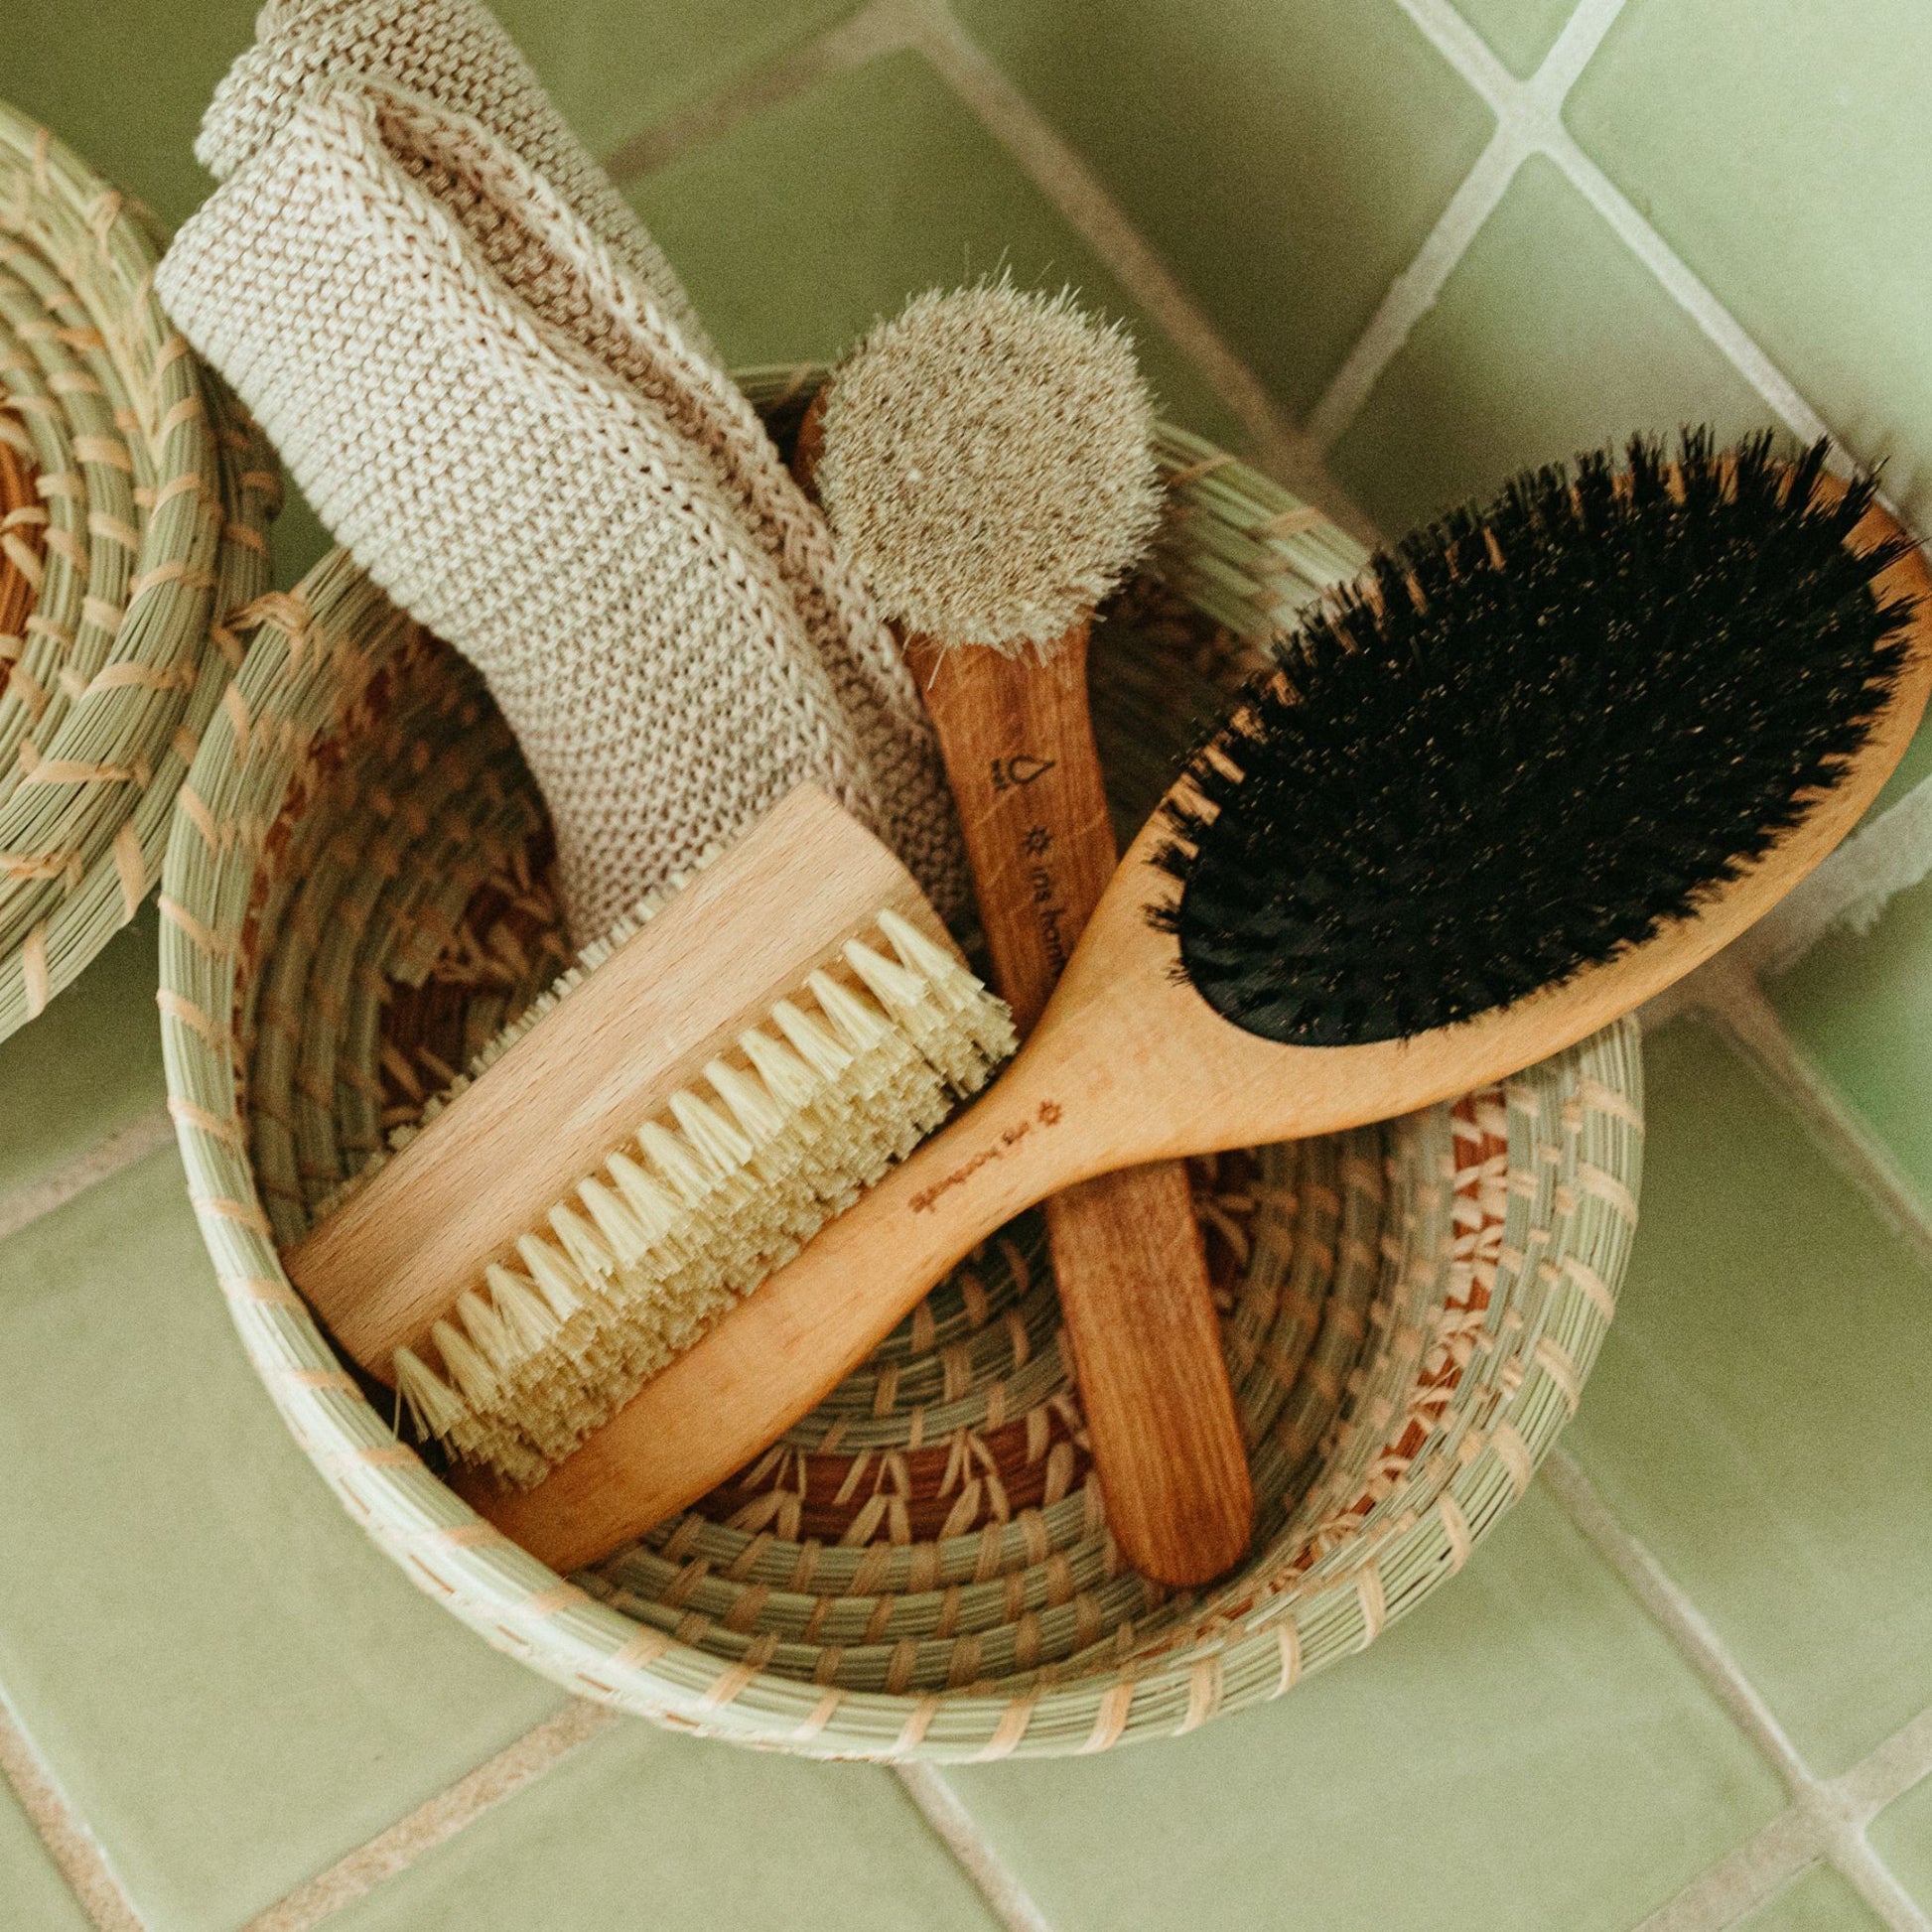 Finger Nail Brush, face-cleaning towel, hairbrush and a face exfoliating brush in a little basket